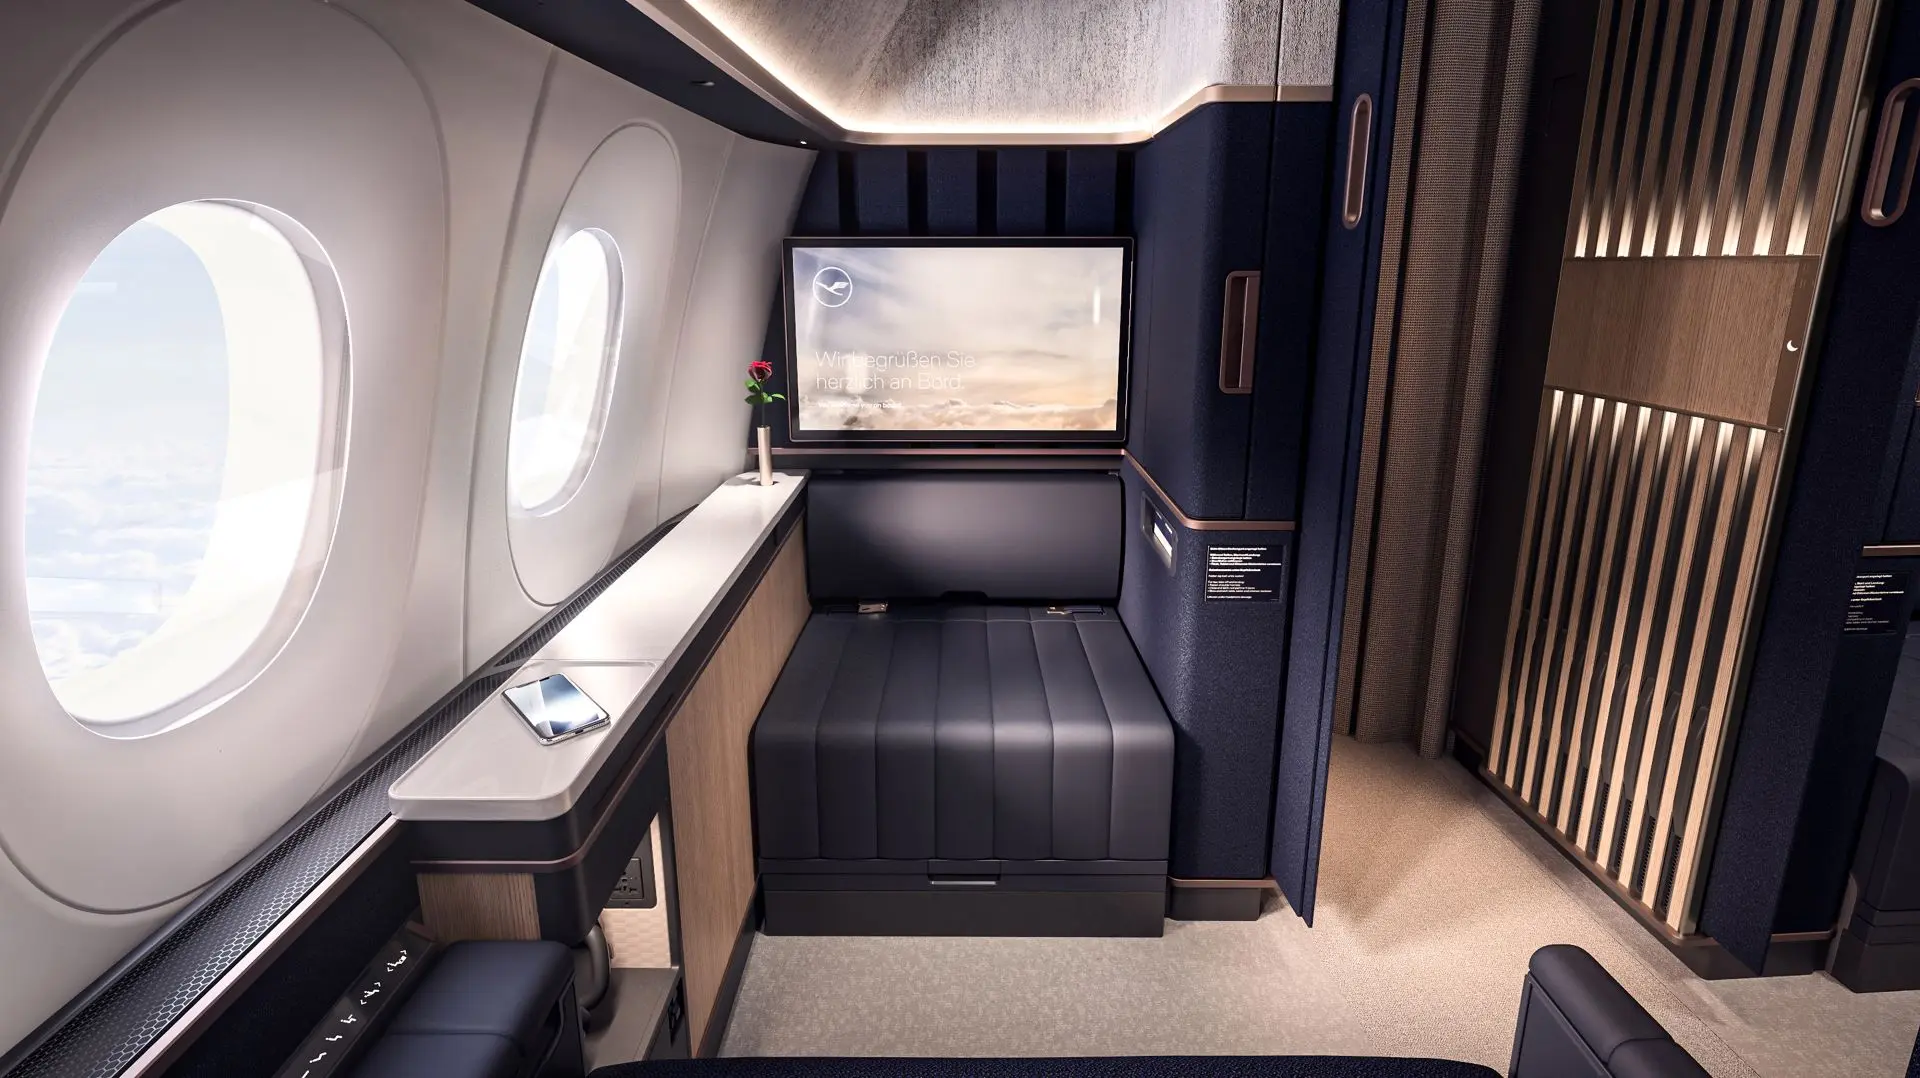 Airlines News - Lufthansa unveils suites for First and Business Class